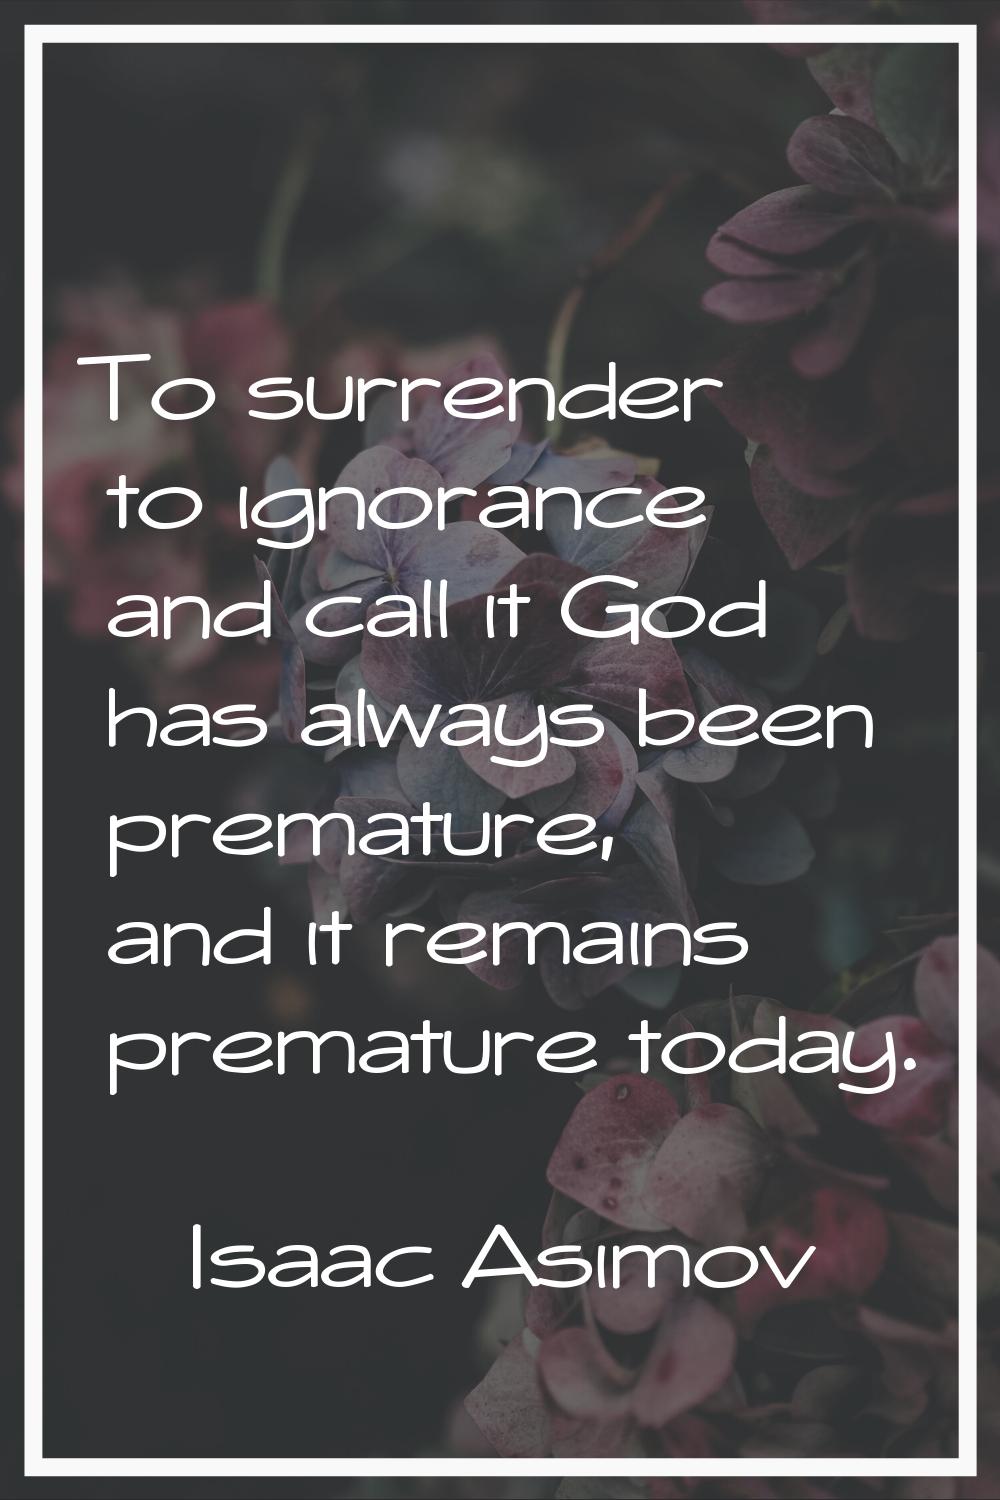 To surrender to ignorance and call it God has always been premature, and it remains premature today